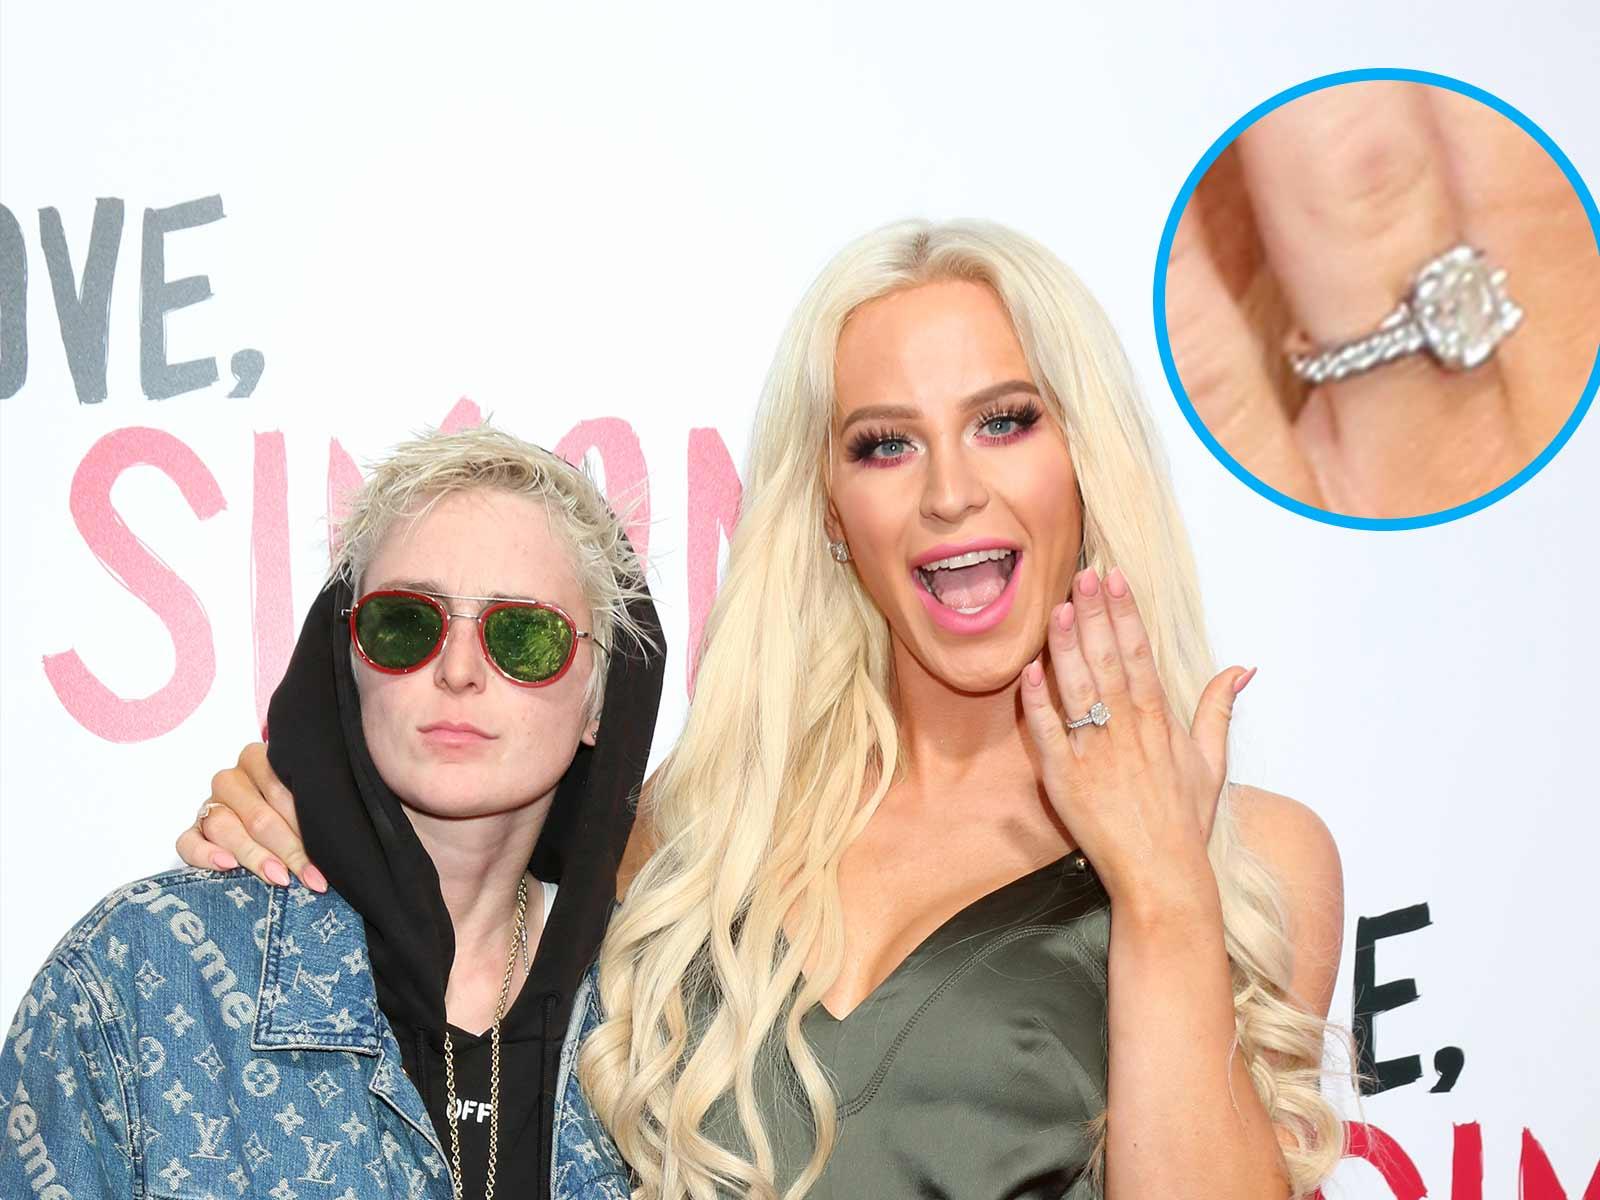 Gigi Gorgeous Shows Off Her Fiancée and Ring at Red Carpet Debut